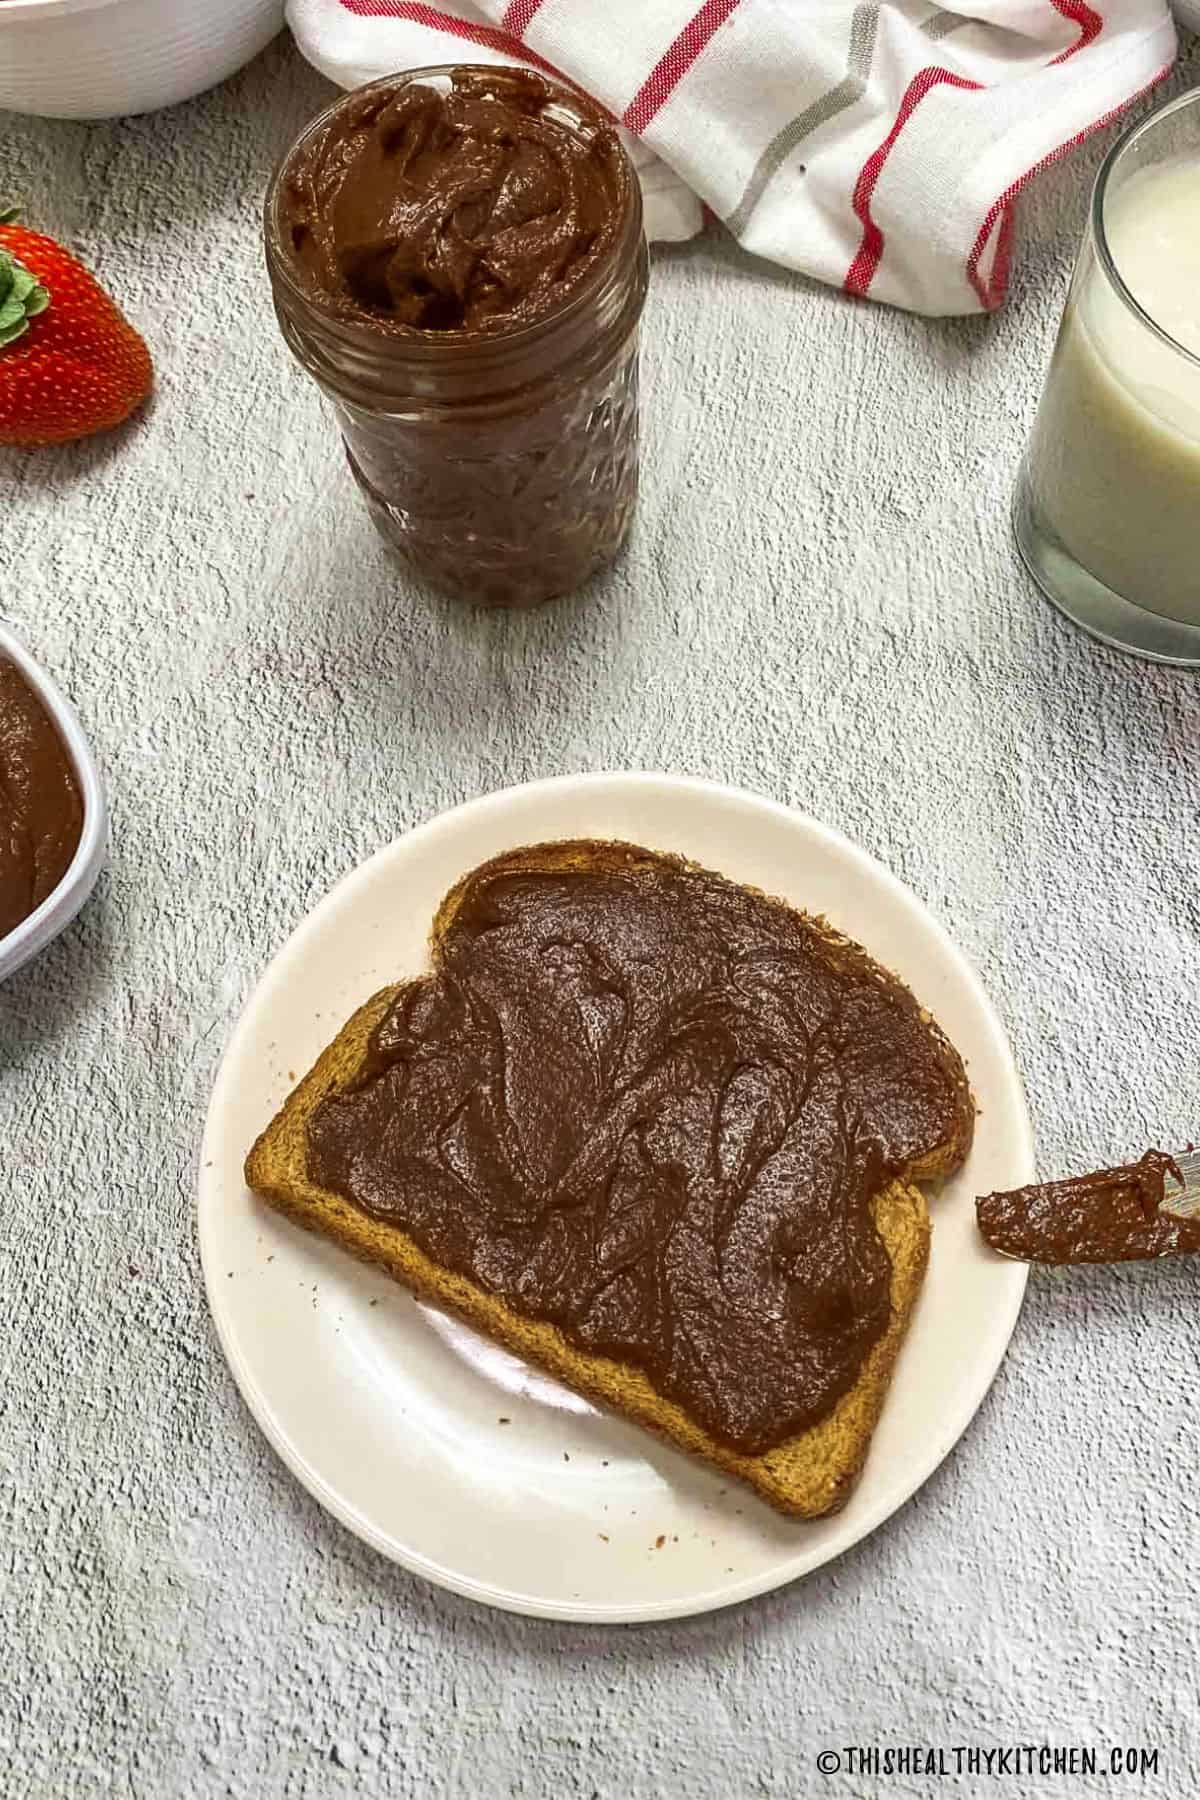 Glass jar of chocolate spread behind toast on plate with chocolate spread.